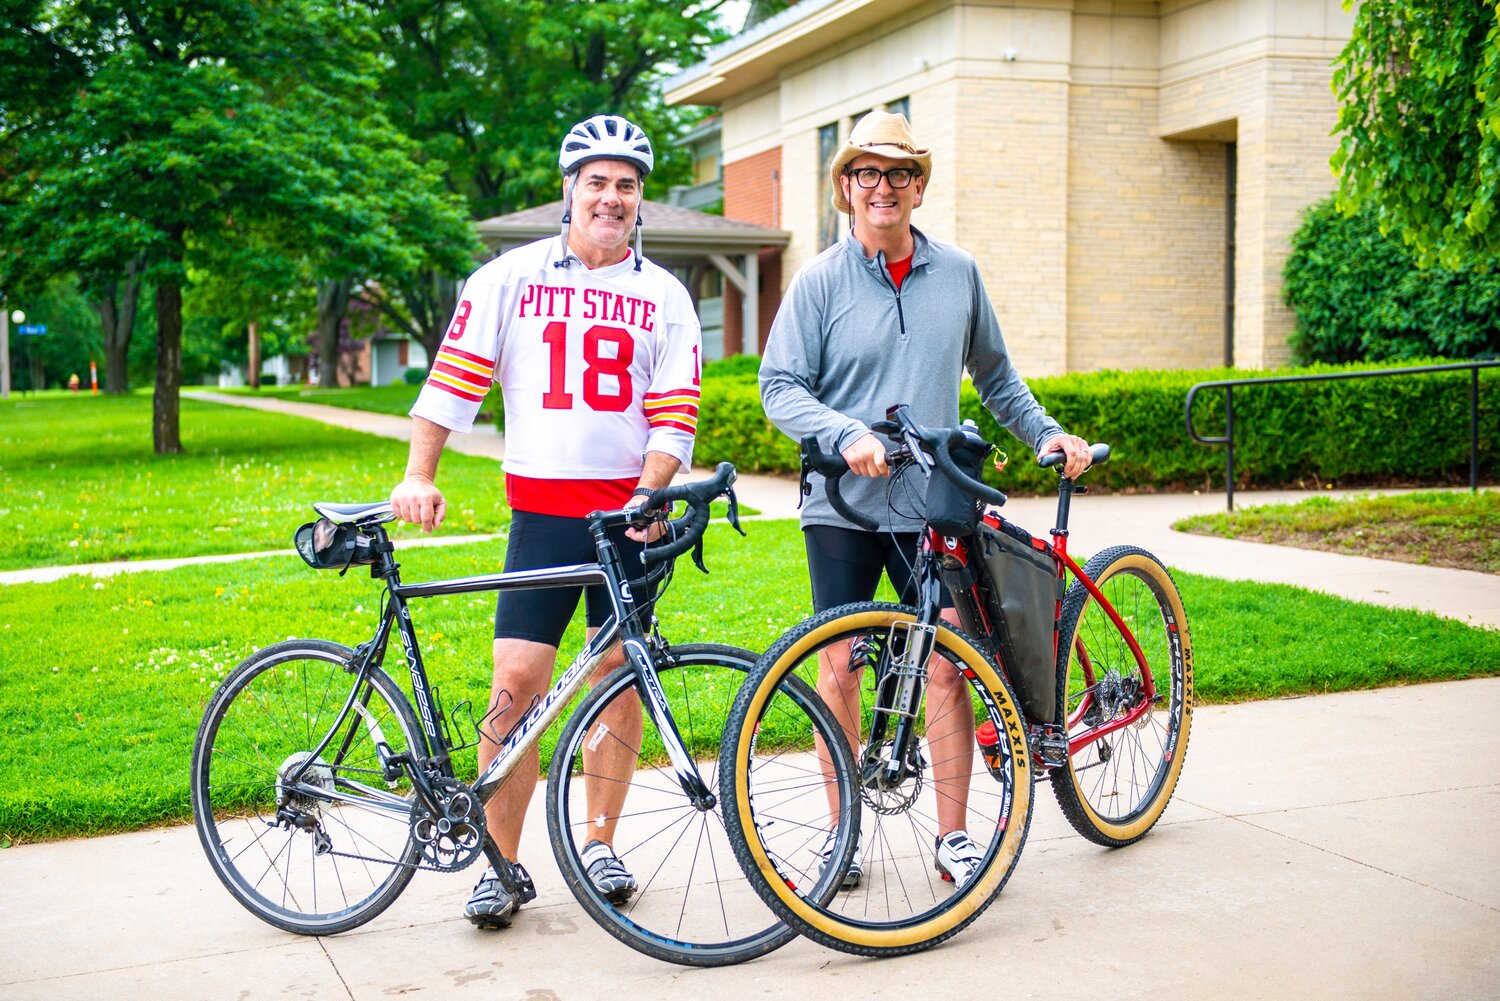 Pittsburg State University alumnus Bob McNellis (left) joined president Dan Shipp (right) during Day 2 of the "Dan Bikes Kansas" campaign. Donning a Pitt State football jersey, McNellis rode with Shipp from Iola to Lawrence via the Prairie Spirit Trail. "Dan Bikes Kansas" will take Shipp across 800 miles of Kansas over the course of 12 days. The goal of the campaign is to raise $8 million in student scholarships, as well as give Shipp the chance to connect with Kansans across the state.